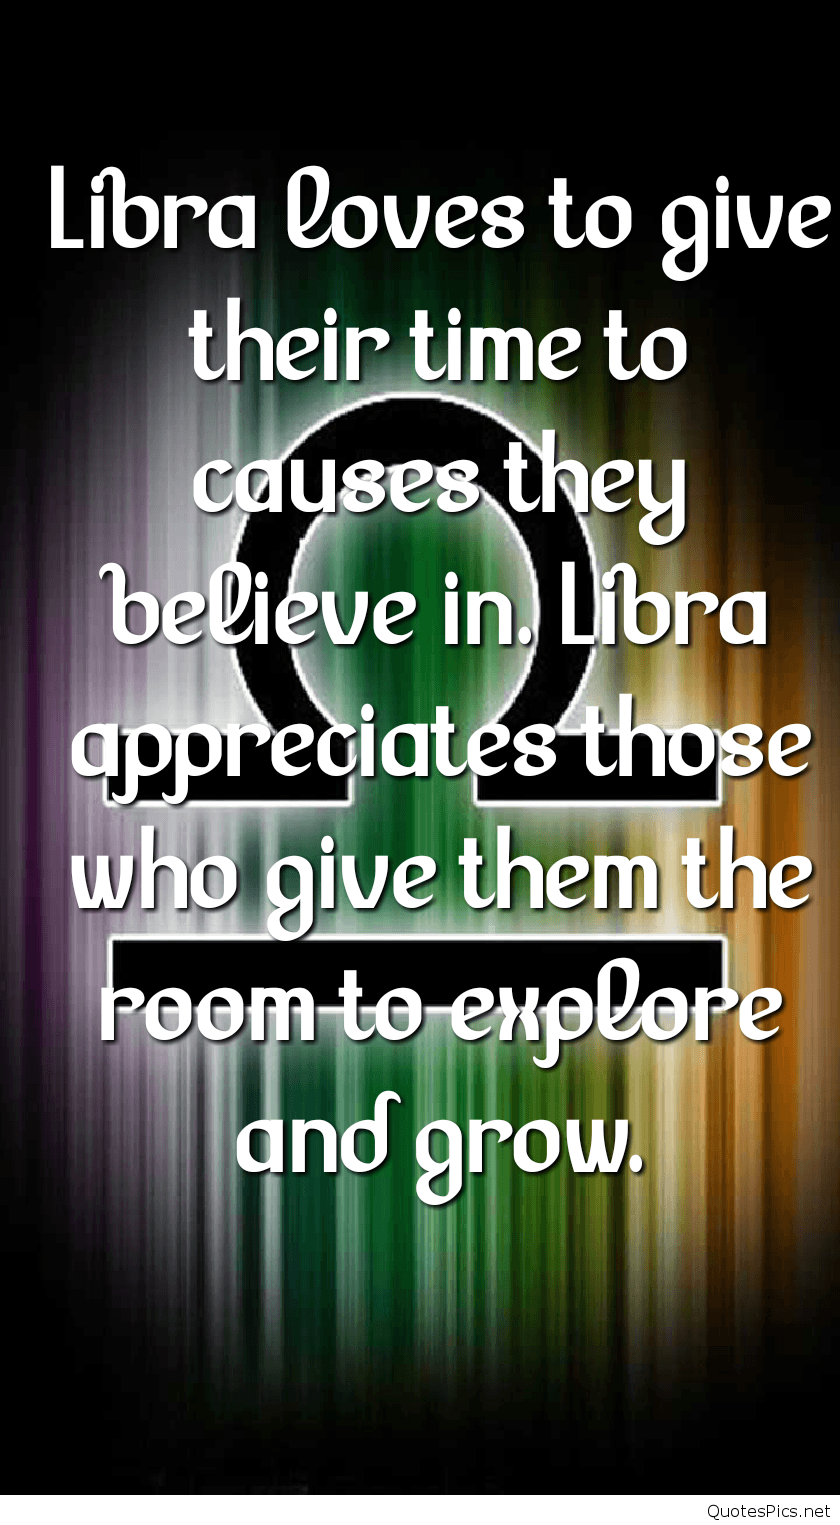 Best Libra Quotes, Image and Libra Zodiac Facts